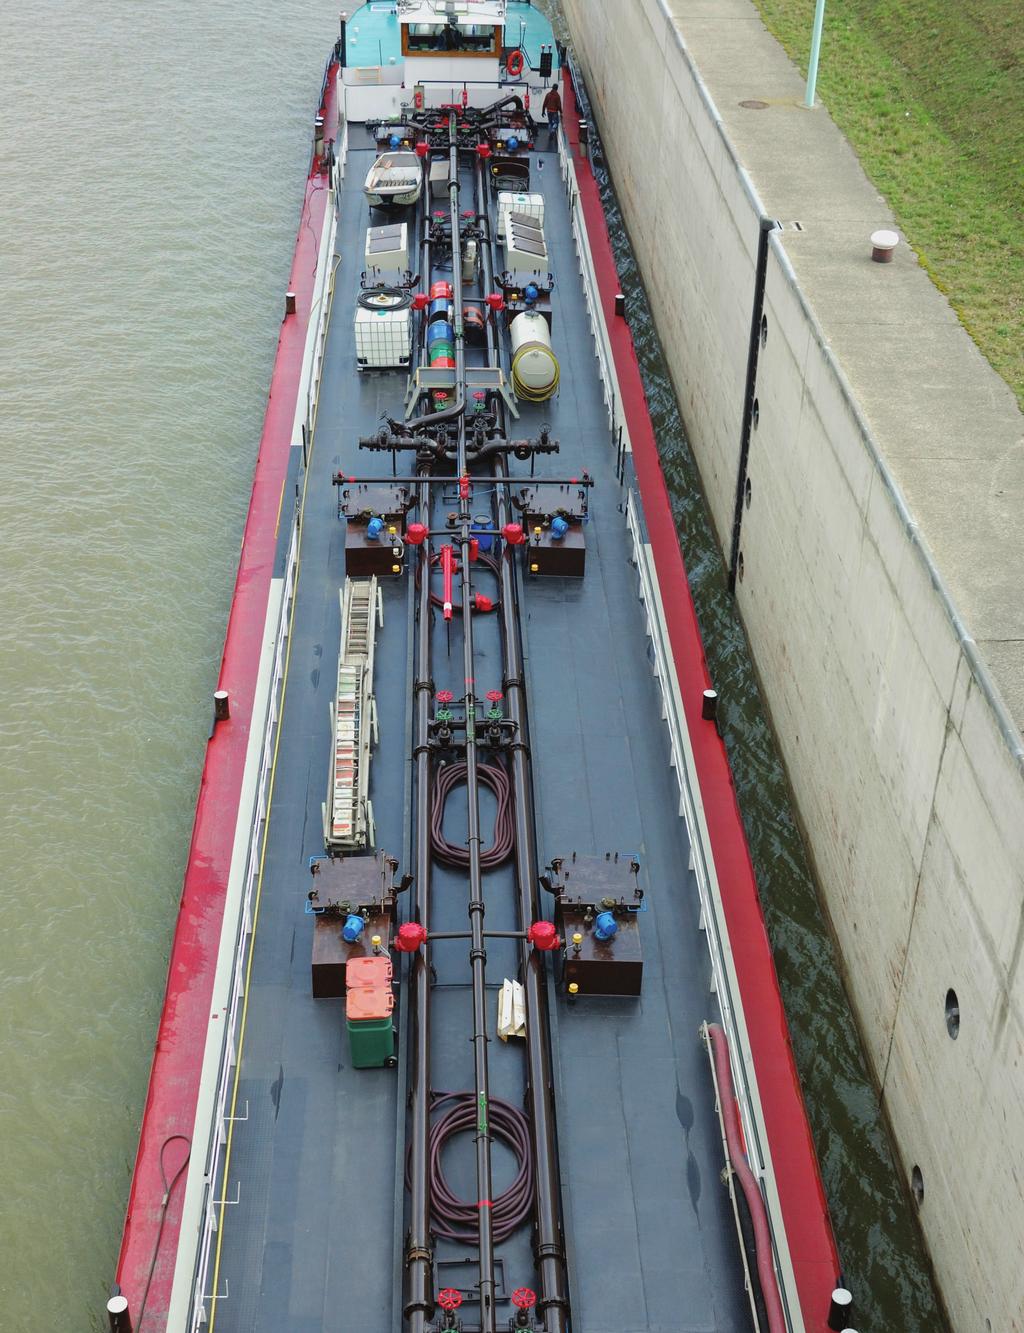 Pile Fenders - Test Data (brasion & Performance) Pile fenders provide an effective way to protect steel or concrete piles from barge traffic.